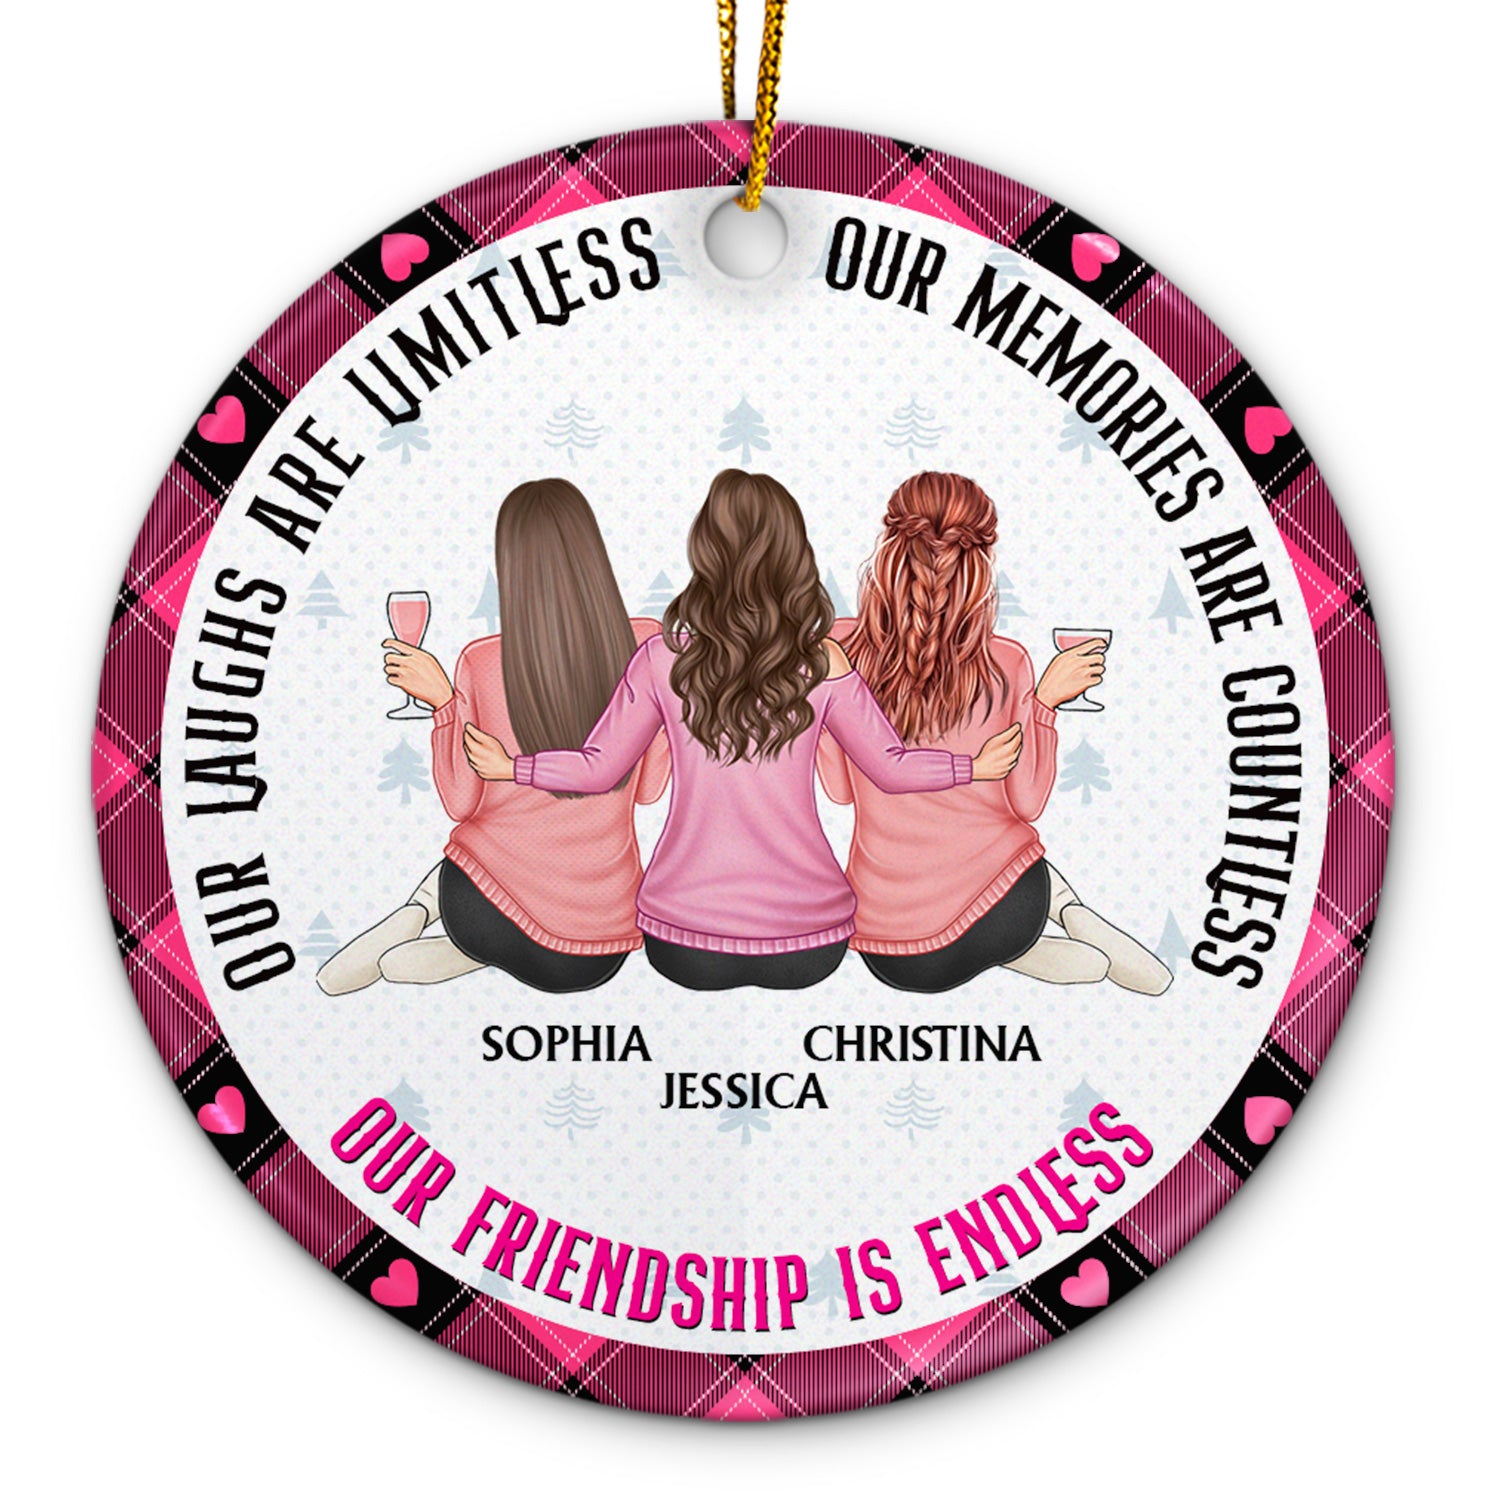 Our Memories Are Countless, Our Friendship Is Endless Pink - Christmas Gifts For Besties, Soul Sisters - Personalized Circle Ceramic Ornament